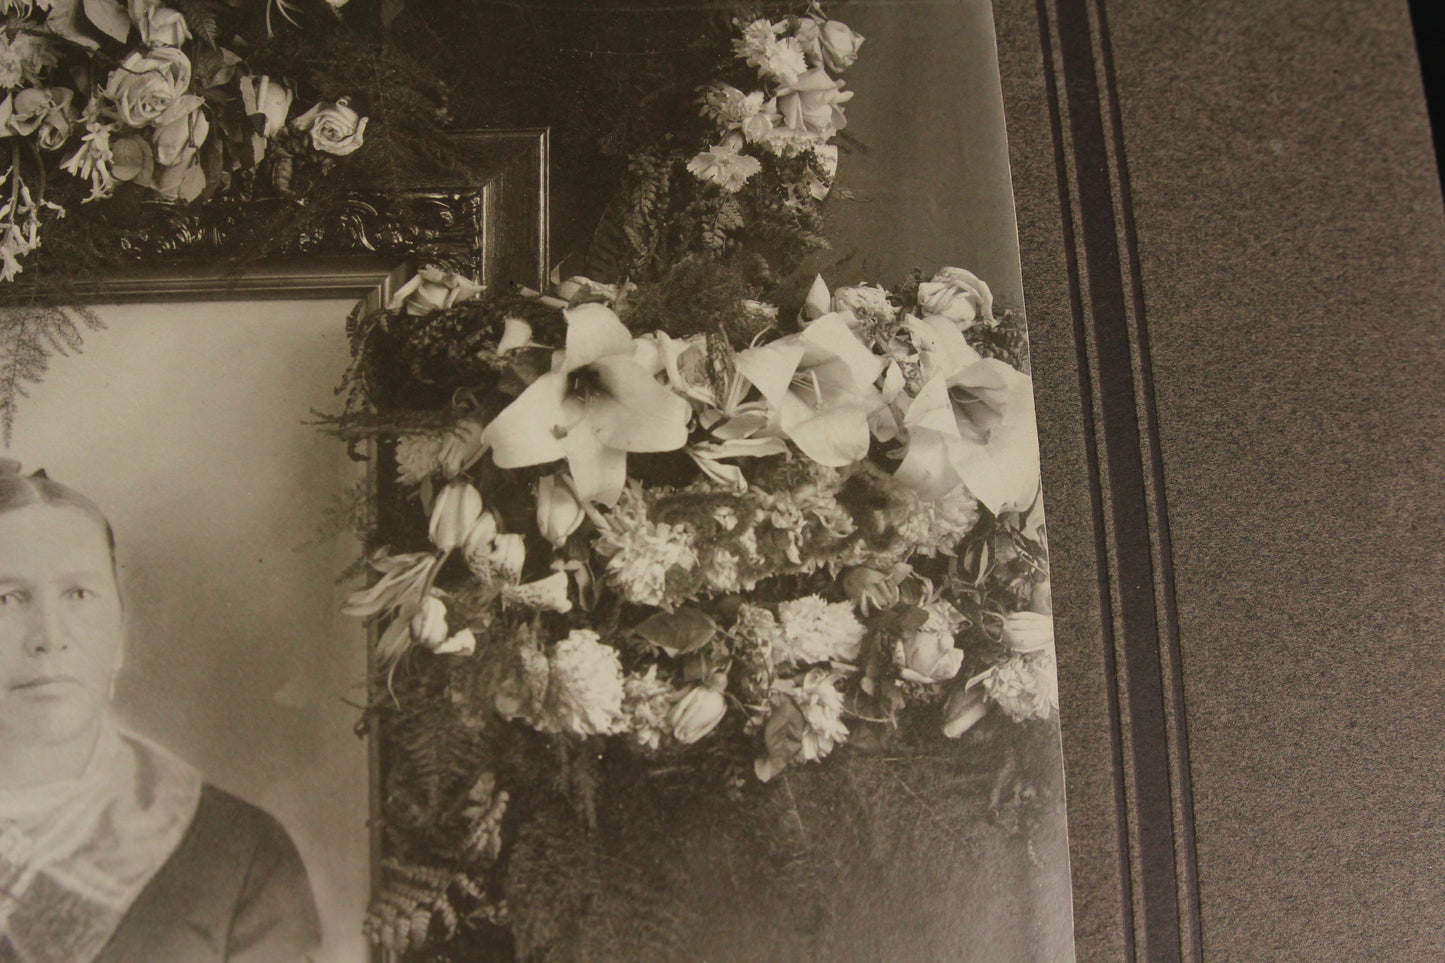 Antique Matted Funeral Flower Arrangement Photograph for Mother with Photo of Deceased